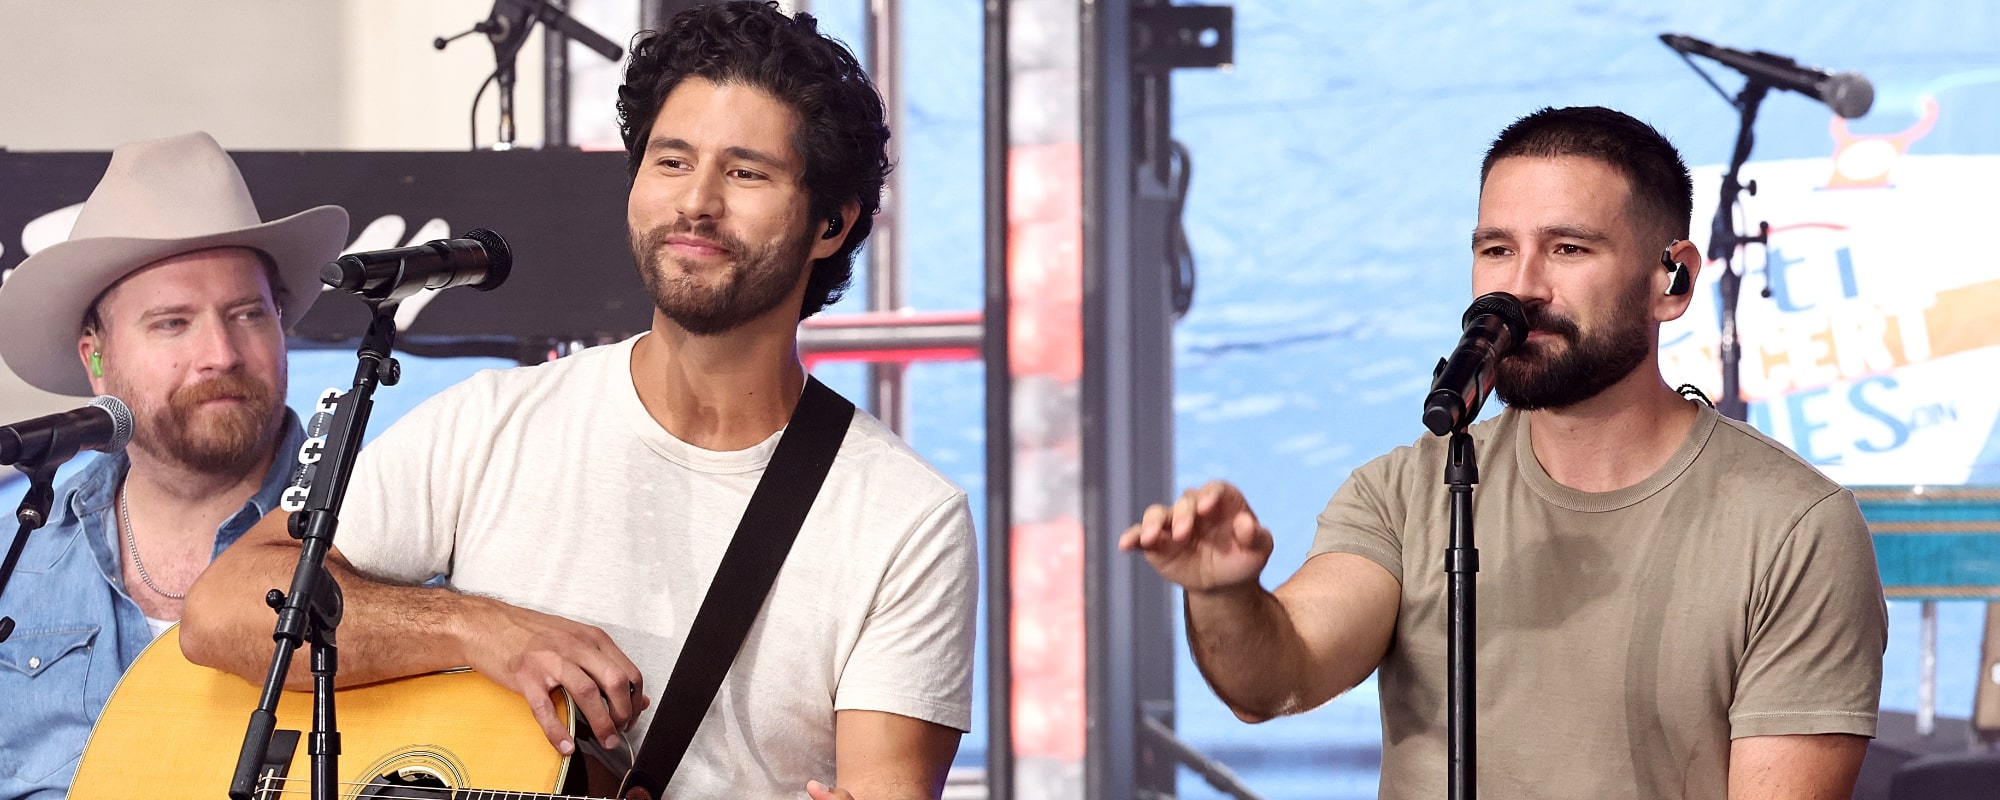 Fans Deem ‘The Voice’ “Unwatchable” Without Niall Horan, Sour on Dan + Shay